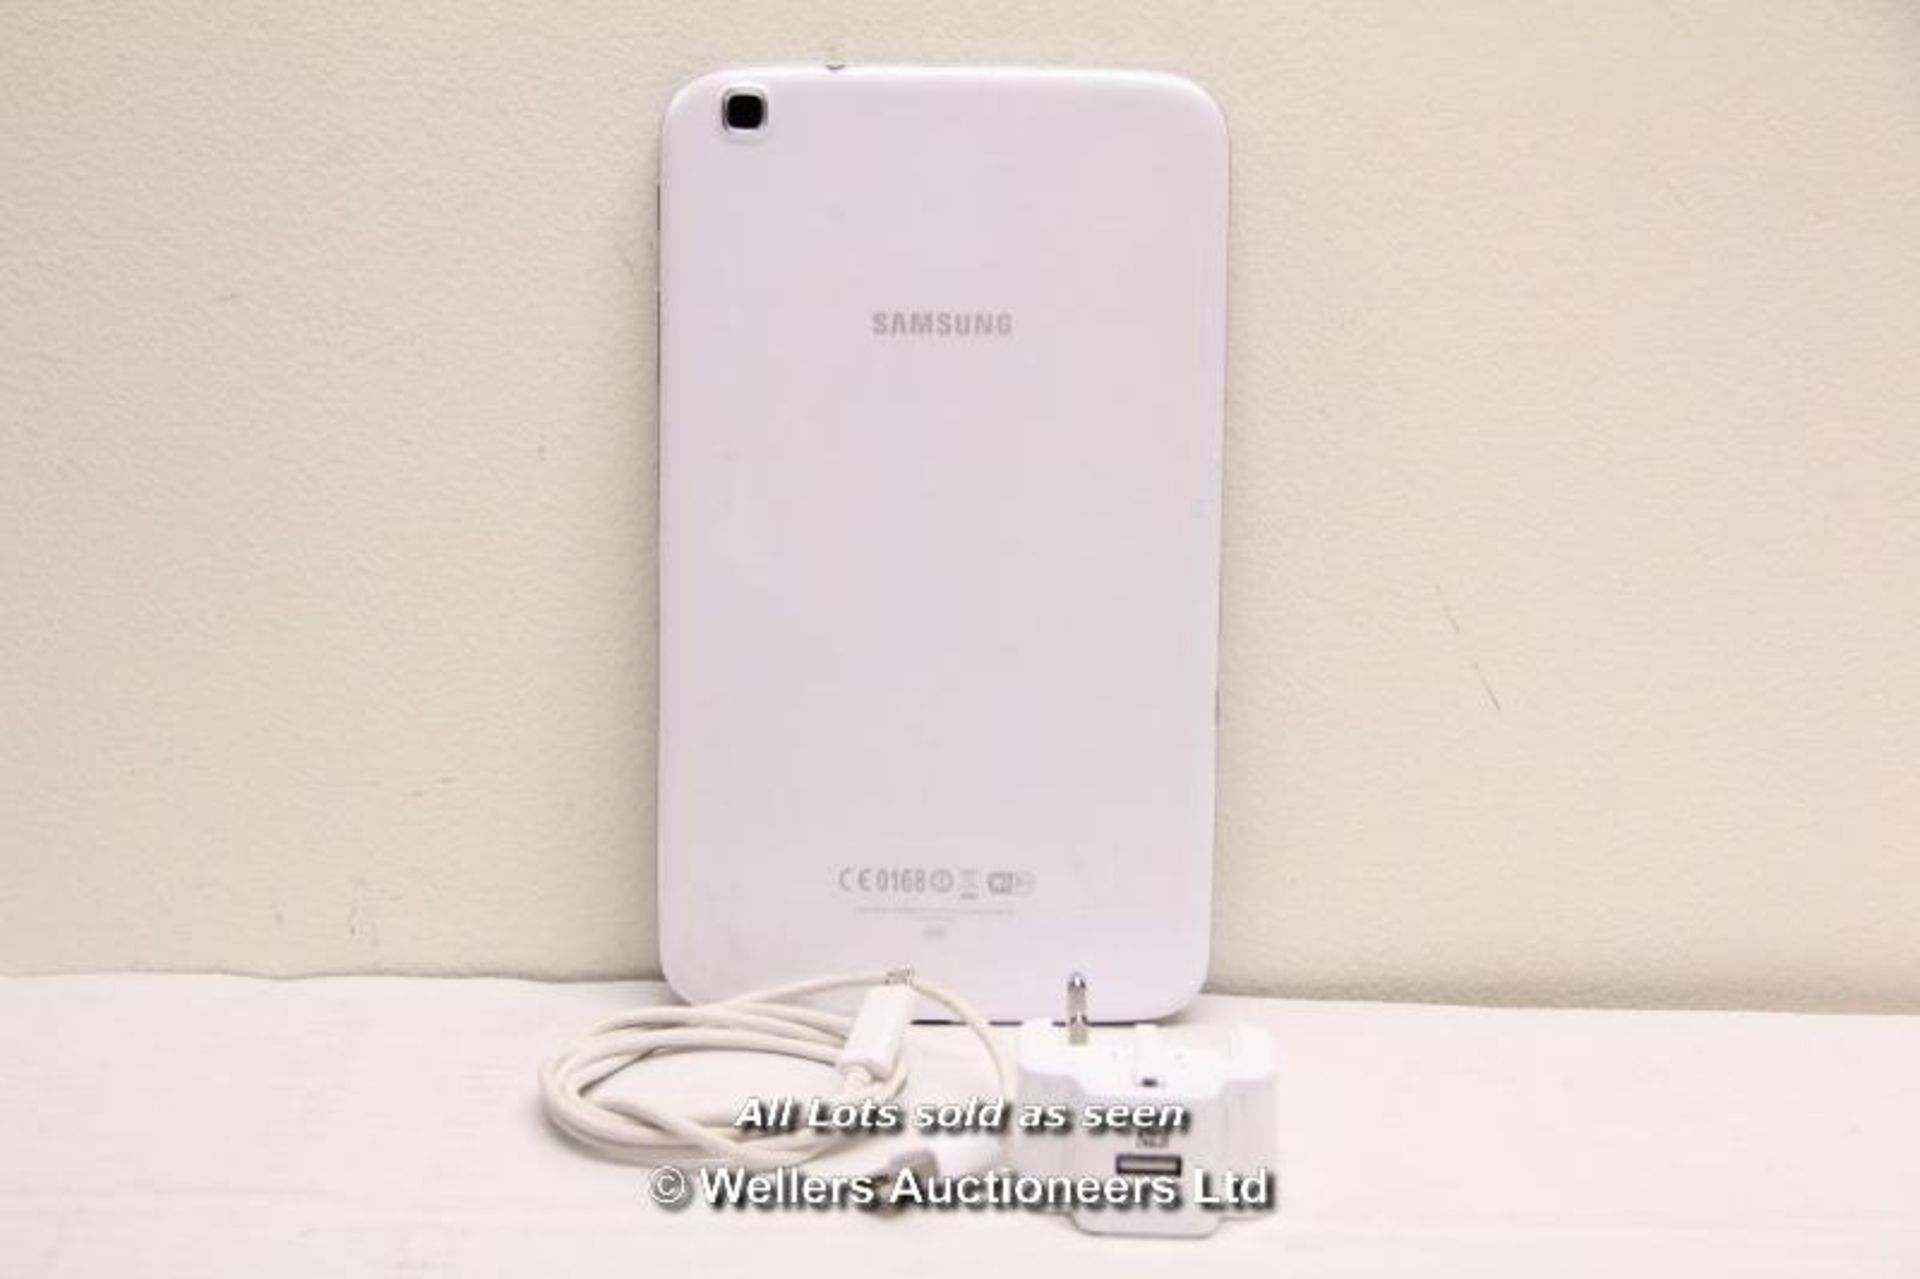 SAMSUNG GALAXY TAB 3 SM-T310 16GB WI-FI  8" - WHITE (36063865) / INCLUDING CHARGER AND USB CABLE / - Image 2 of 2